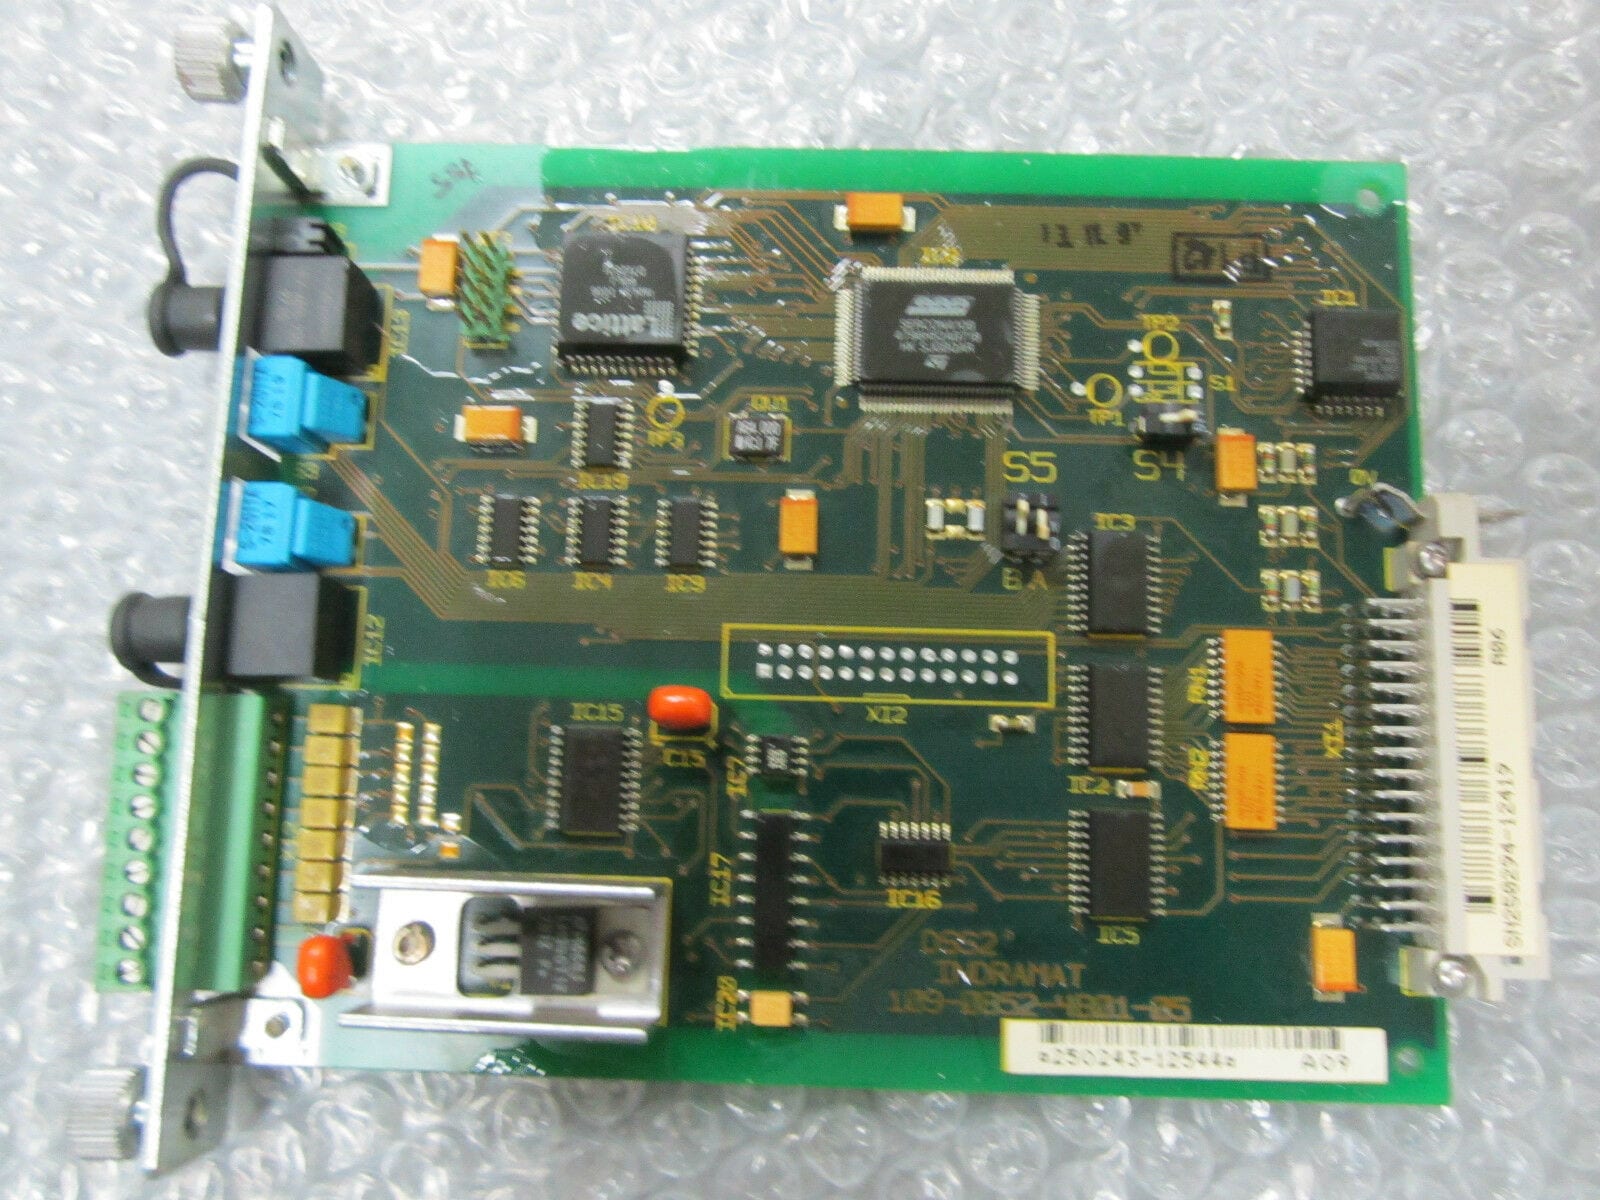 Indramat DSS02.1 Indramat Sercos Interface Module 109-0852-4B01-07 USED 